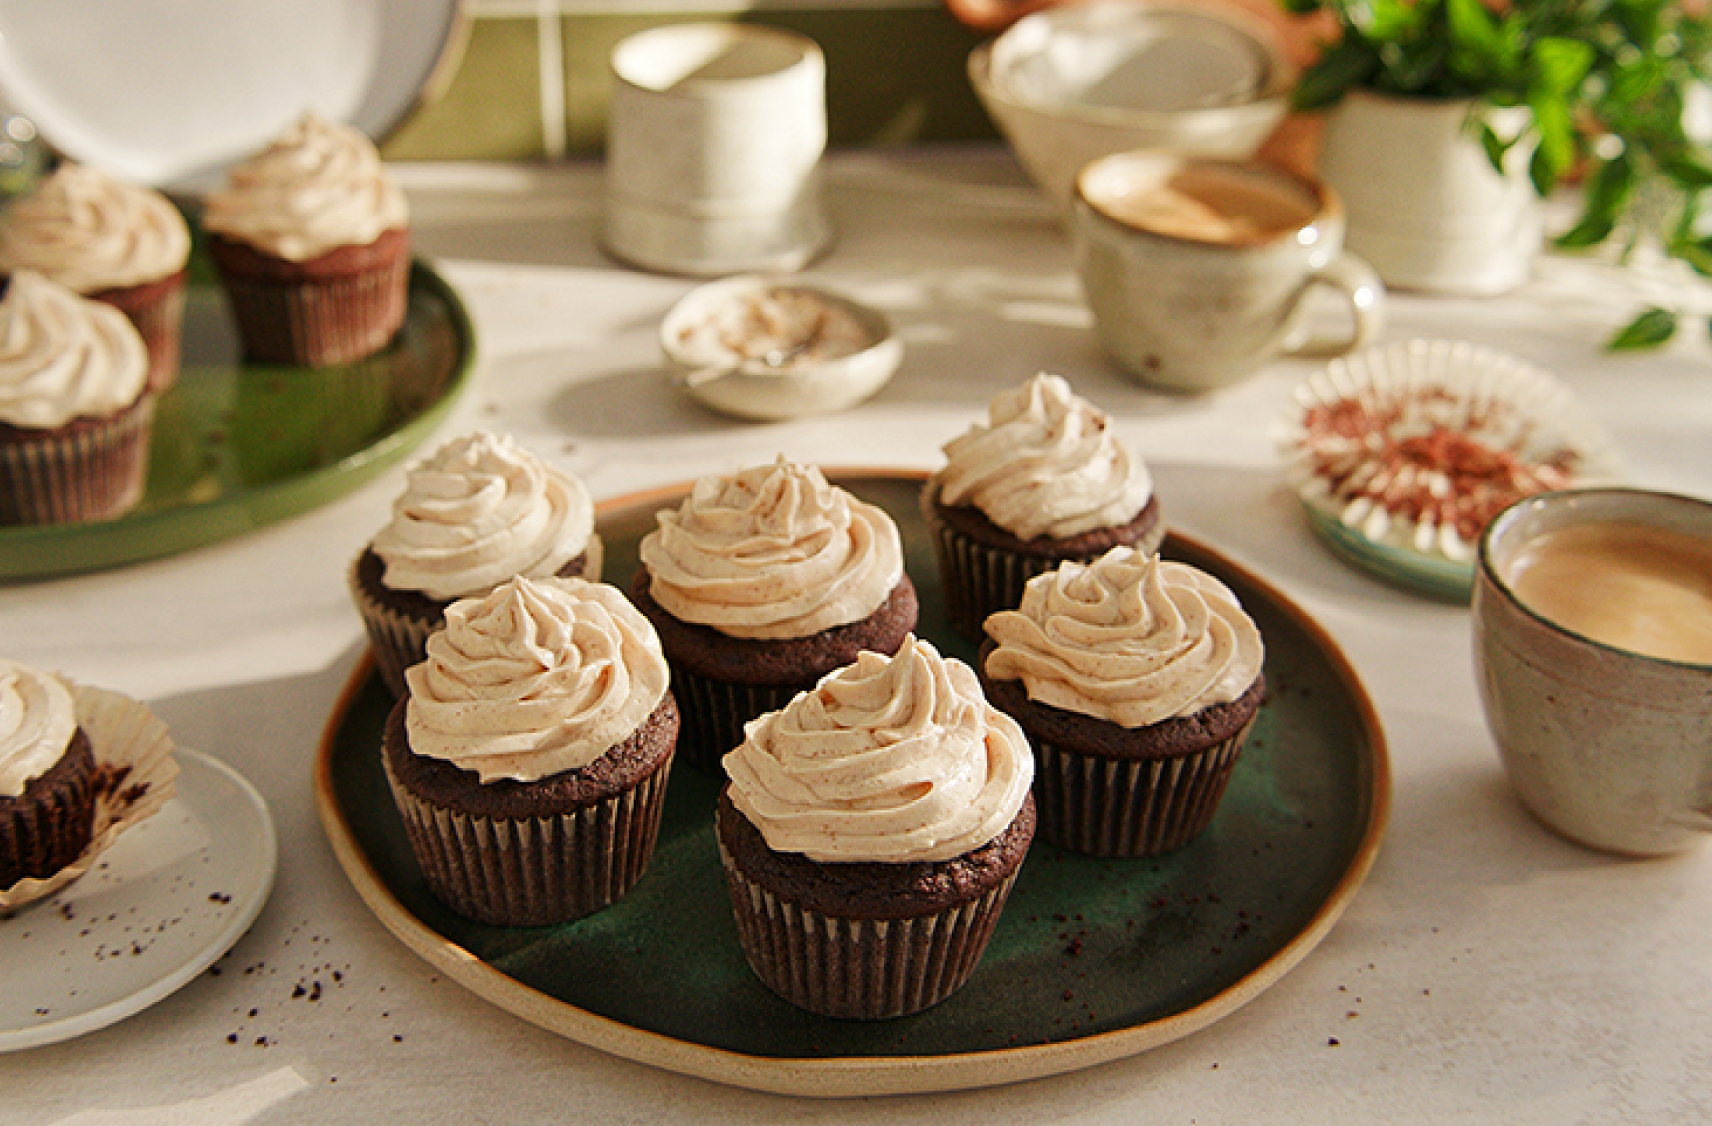 A big round plate filled with Vegan Chocolate Cupcakes with Peanut Butter Frosting